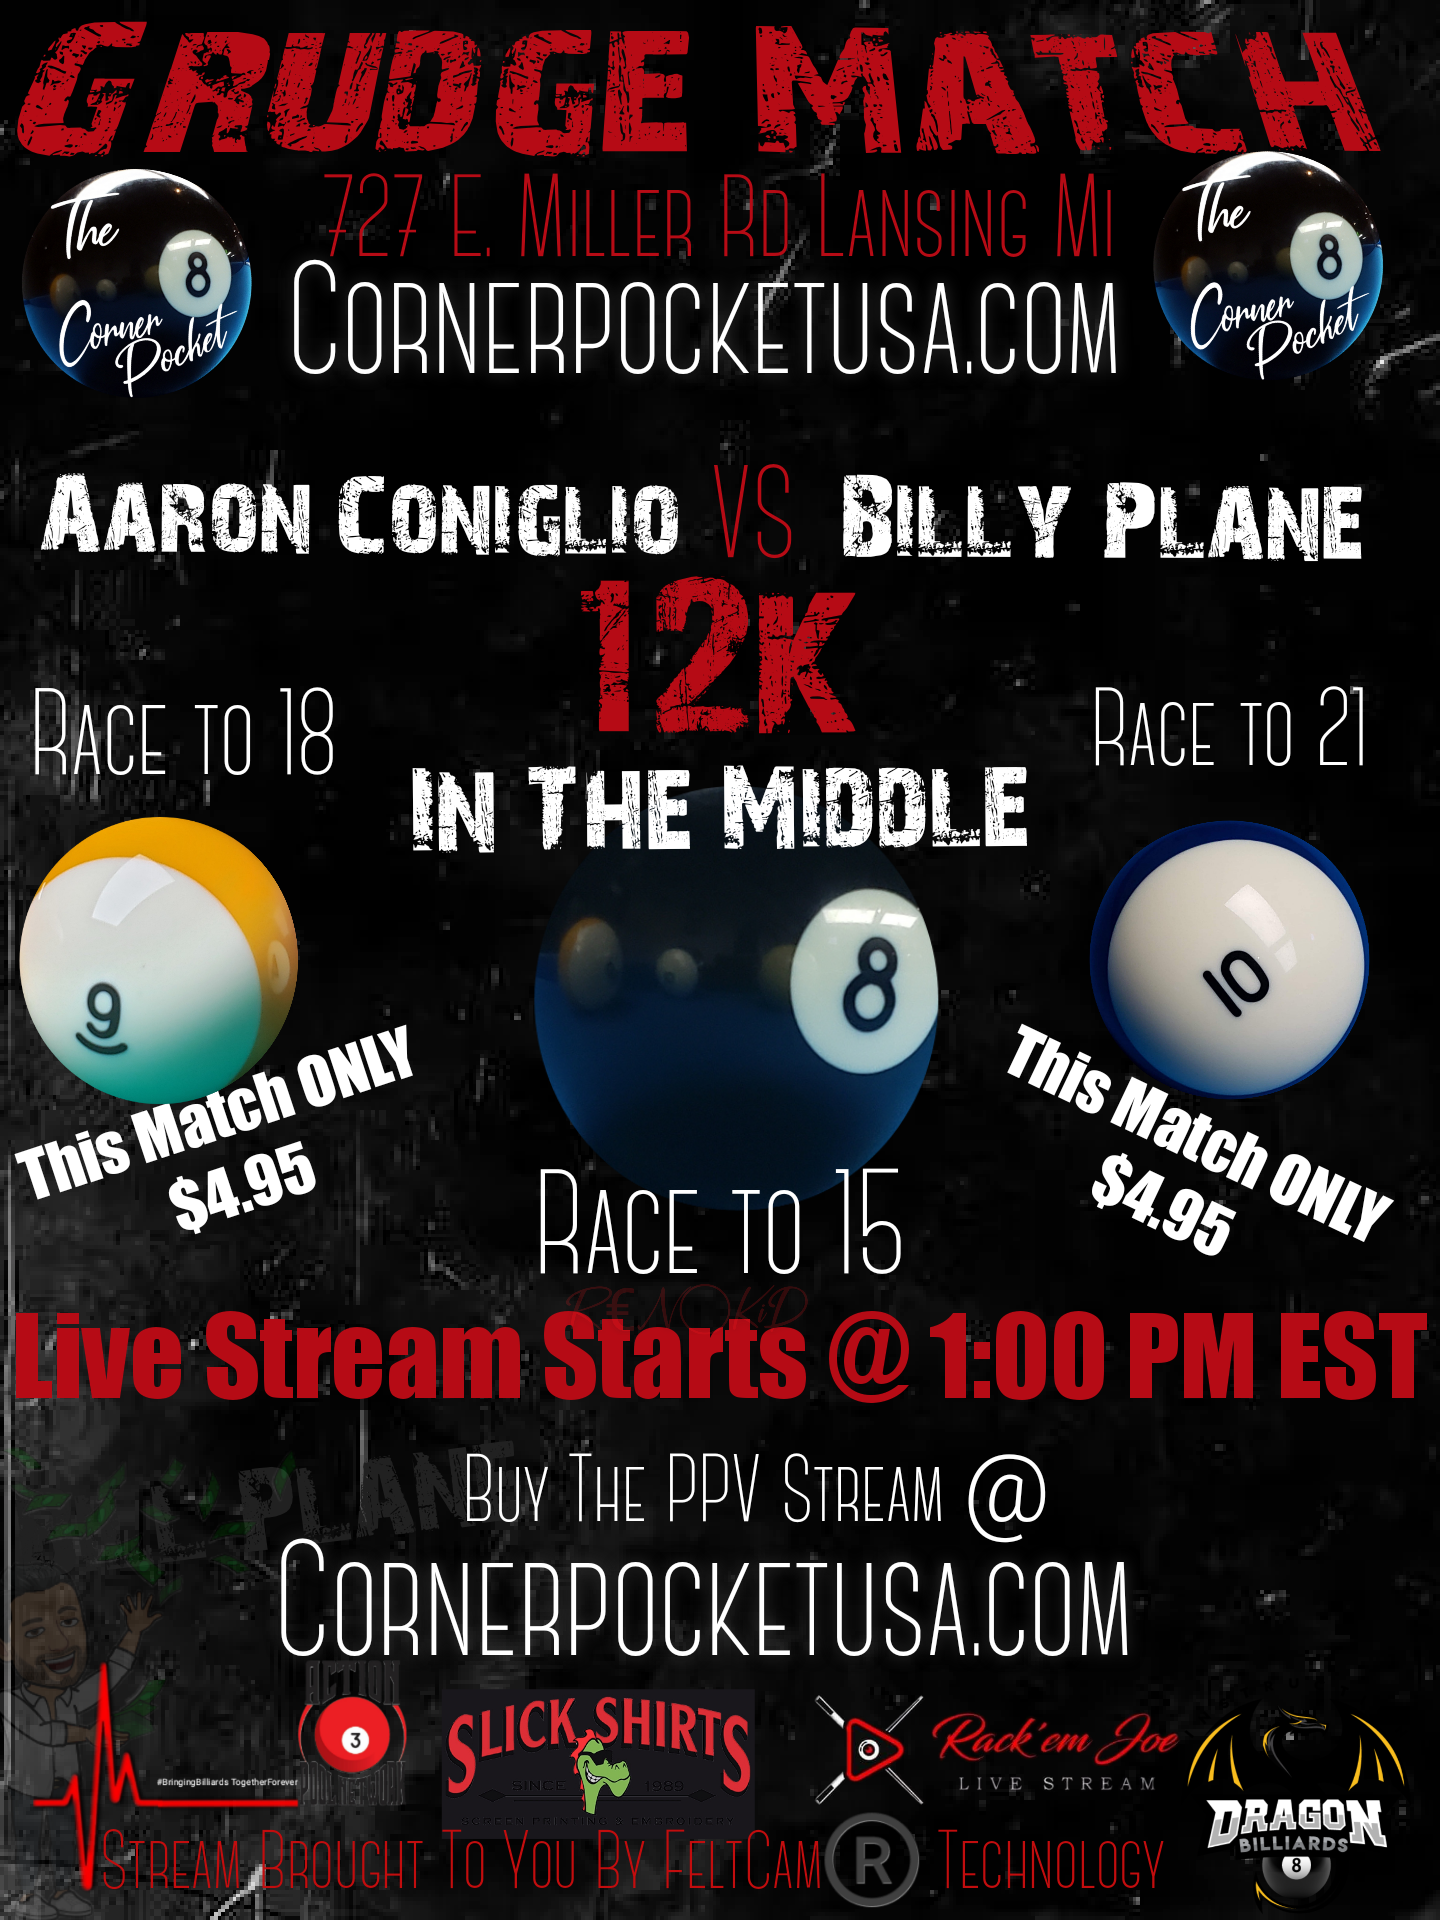 Aaron Conigilo vs Billy Plane $12k in the middle 8, 9, and 10-ball